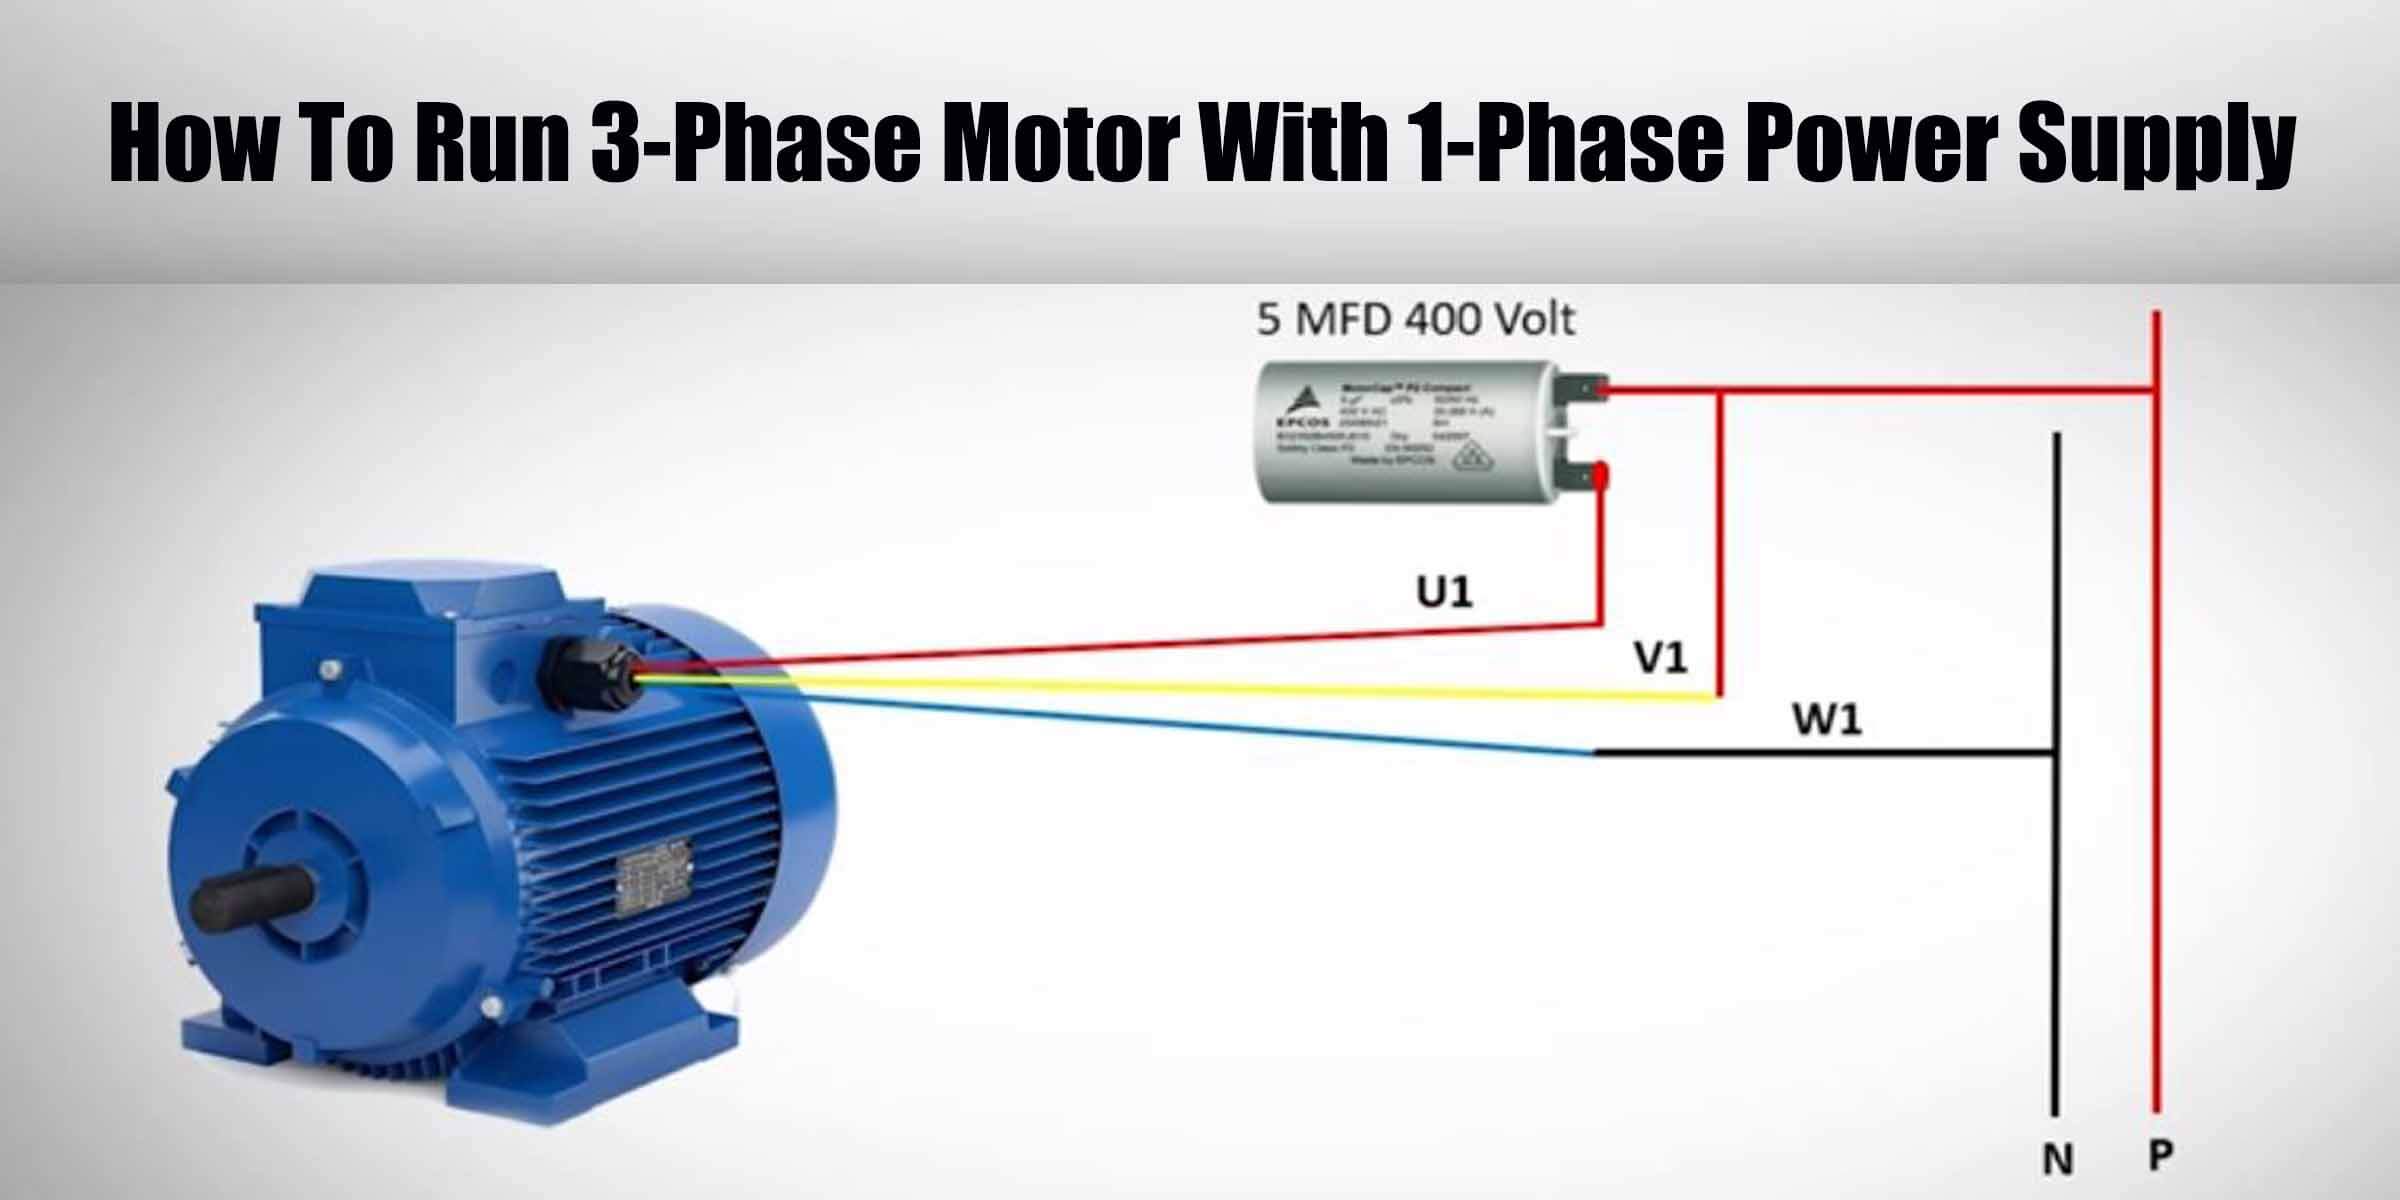 How To Run 3-Phase Motor With 1-Phase Power Supply - Enginee